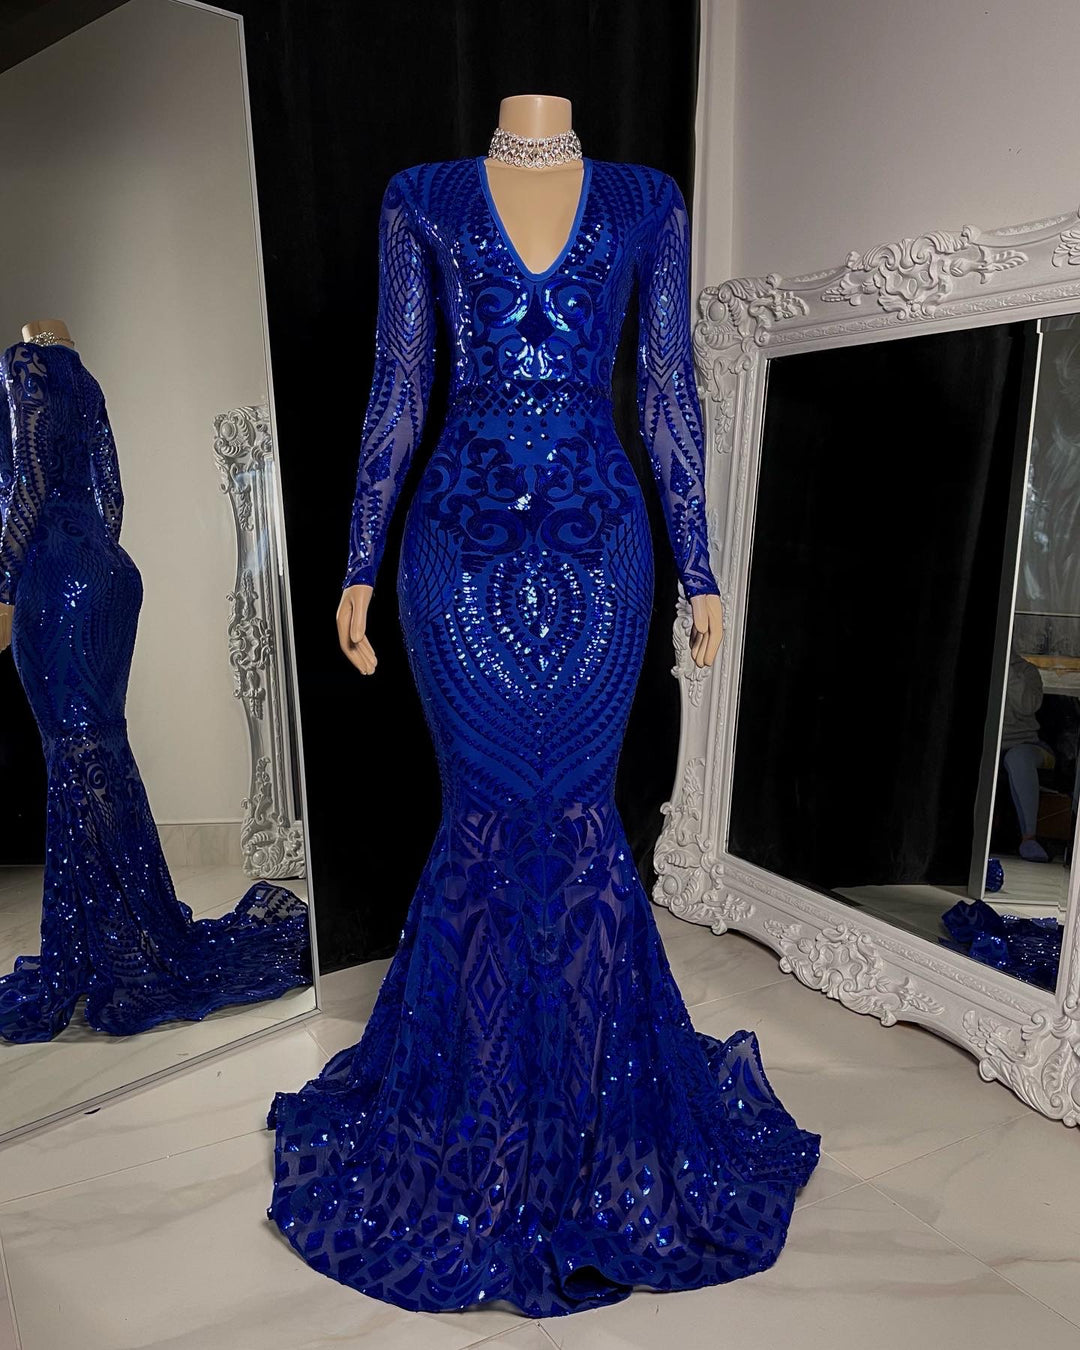 The Talisha Sequin Gown